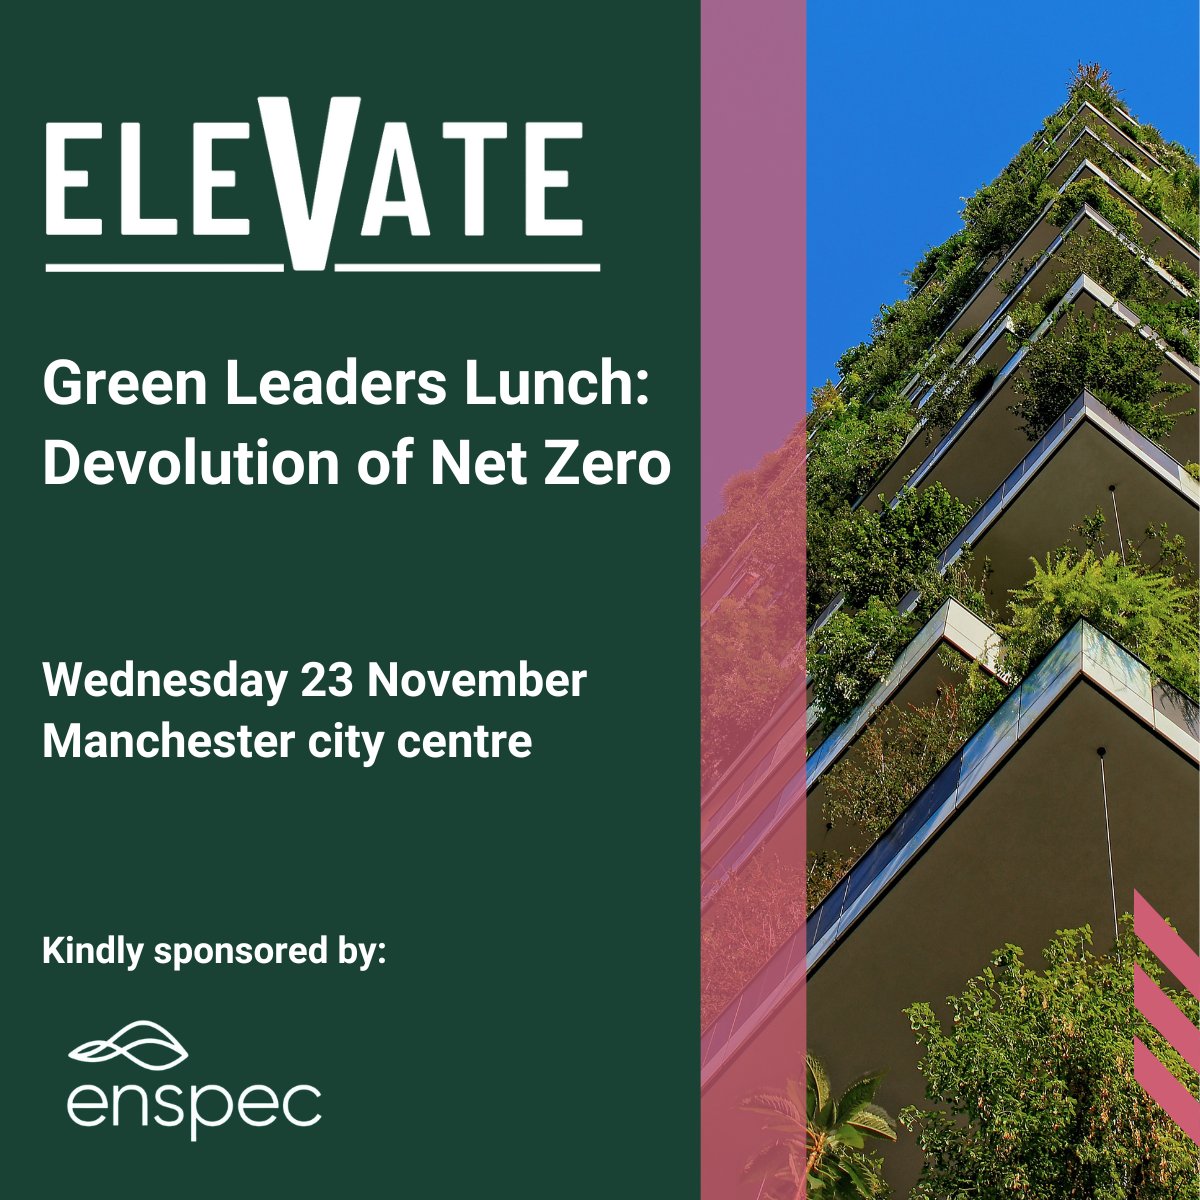 Happy Friday!! 🚀Announcing our Green Leaders Lunch 🚀Better Business Summit - @betternotstop @betterb_network 🚀Sustainable Leadership workshop - @UKGreenEconomy 🚀Community Exchange - @VirginMoney @EnspecPower mailchi.mp/a9788f24105f/w…